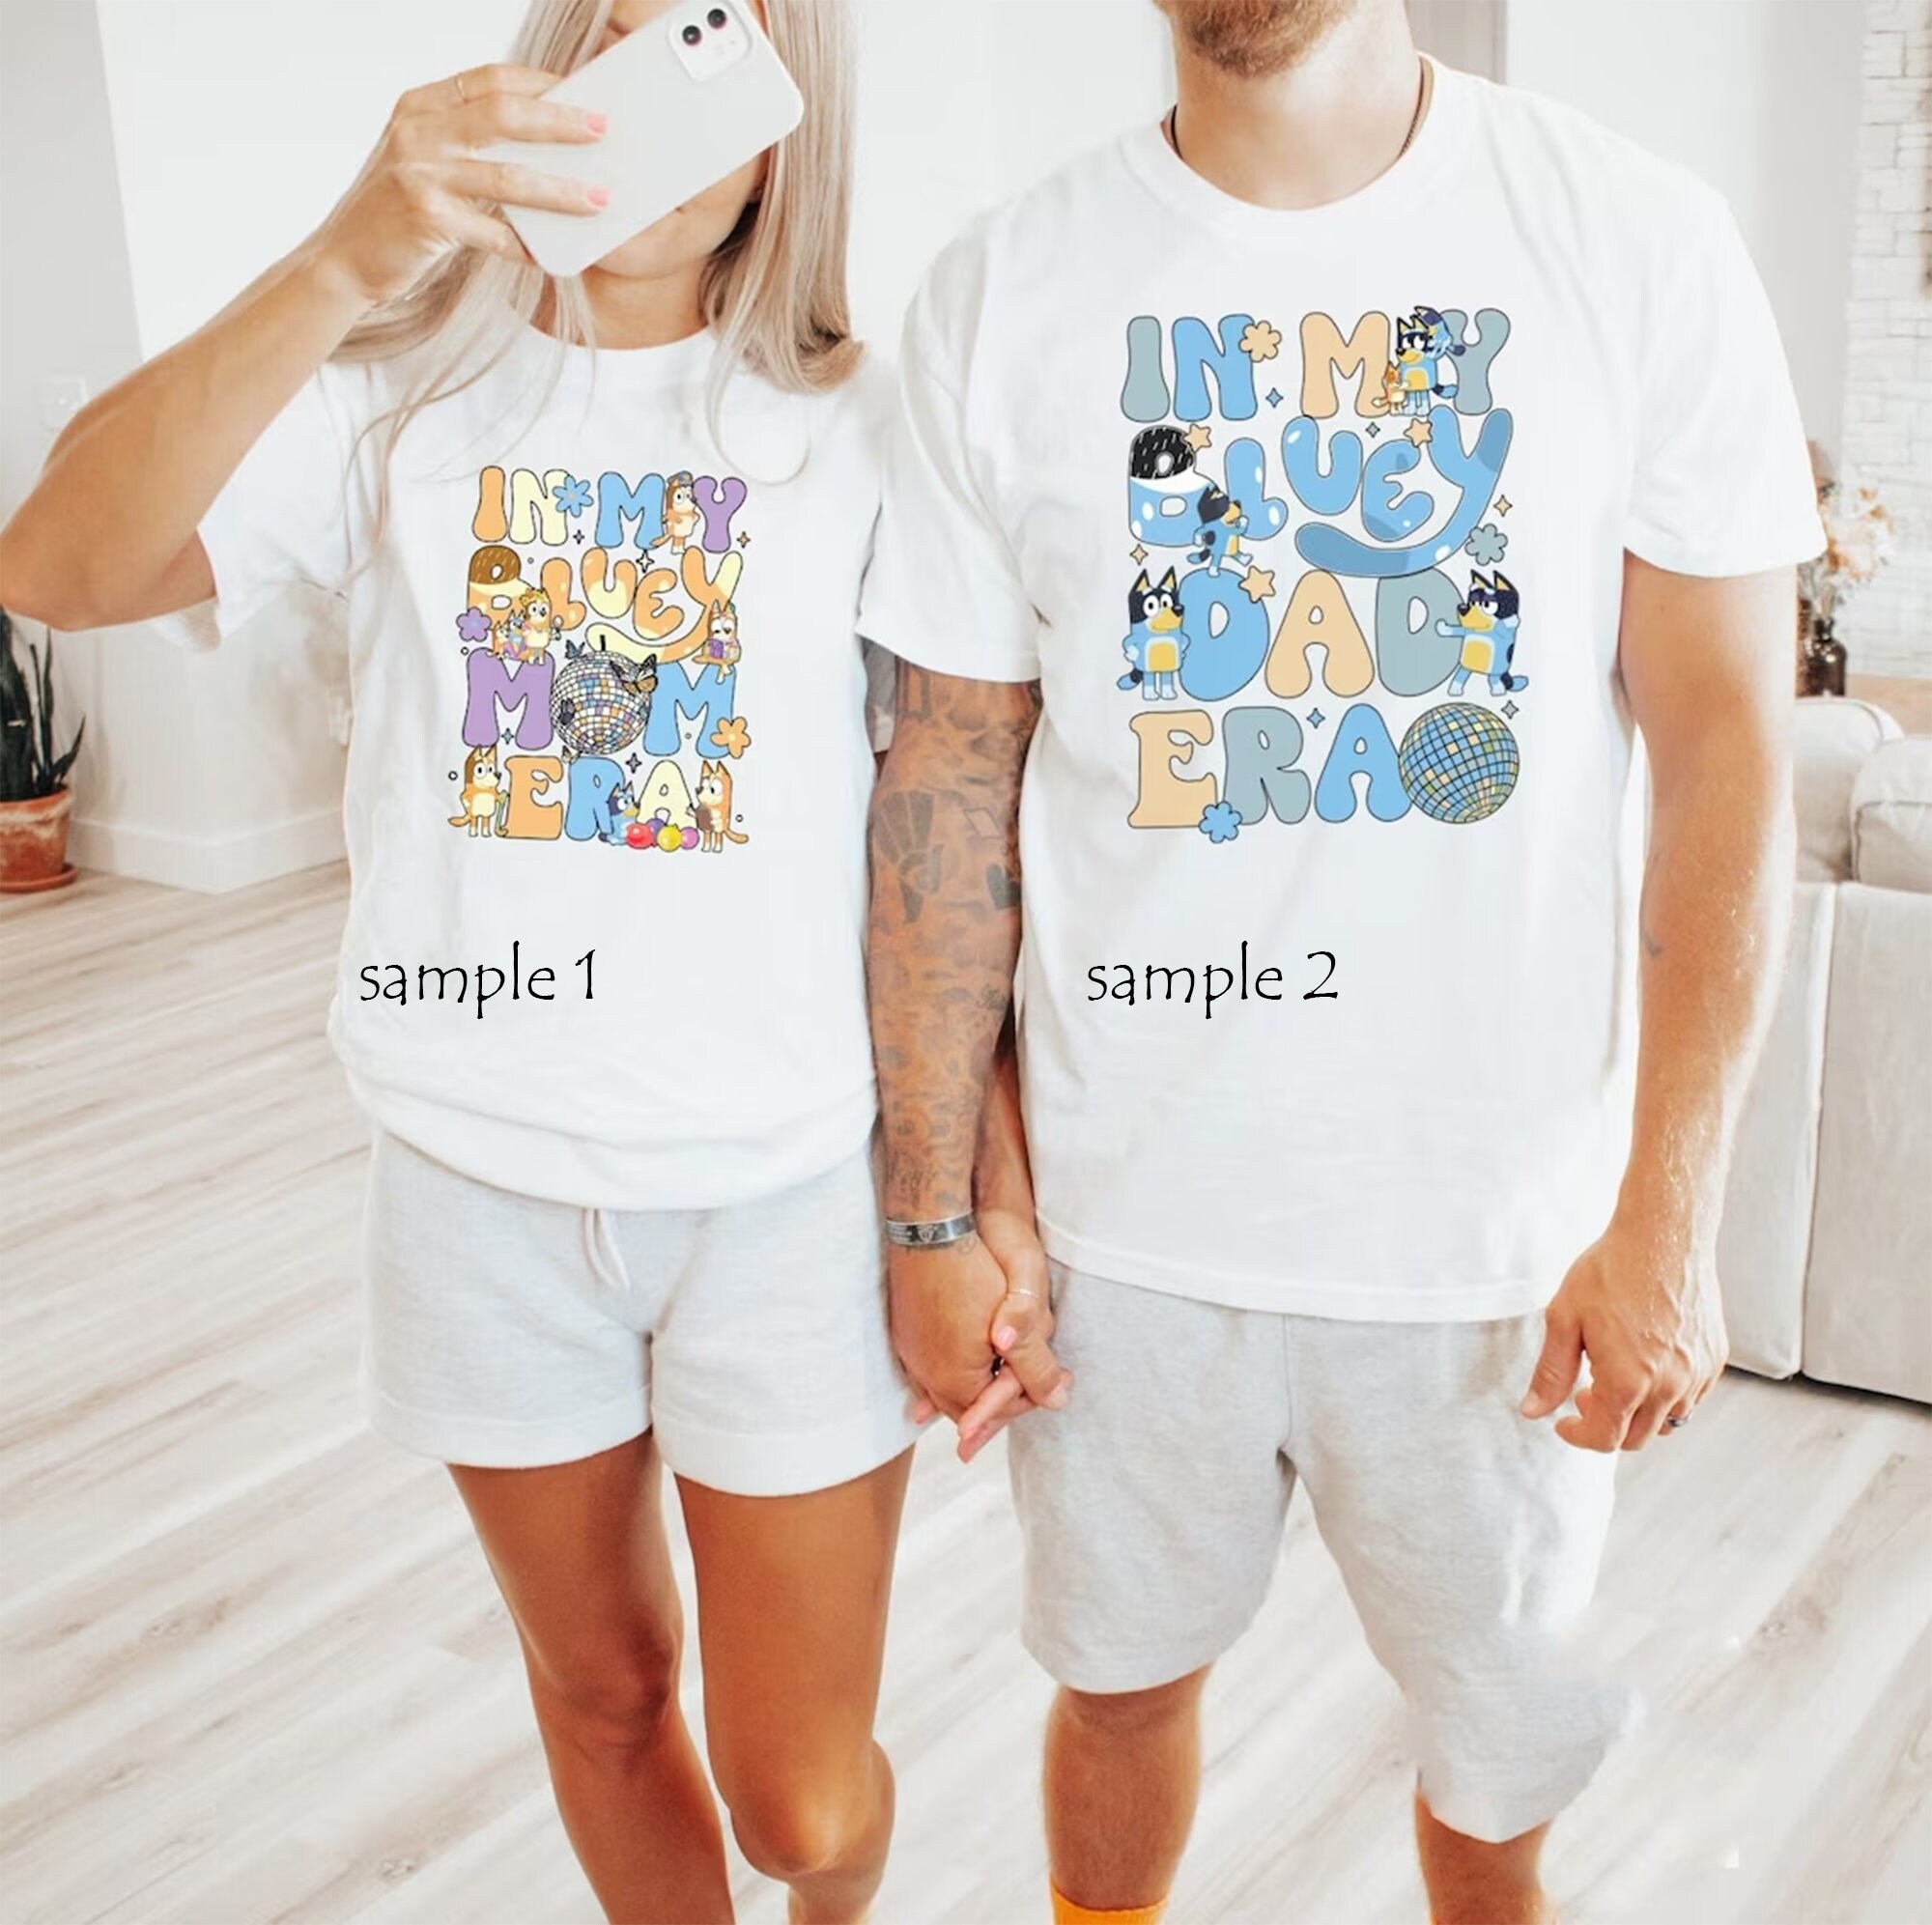 Bluey Inspired Toy Names Unisex Soft T-Shirt- Bluey Dad Shirt- Bluey Shirt Adult- Bluey Birthday Shirt- Funny Tshirt- Unique Gift for Mom